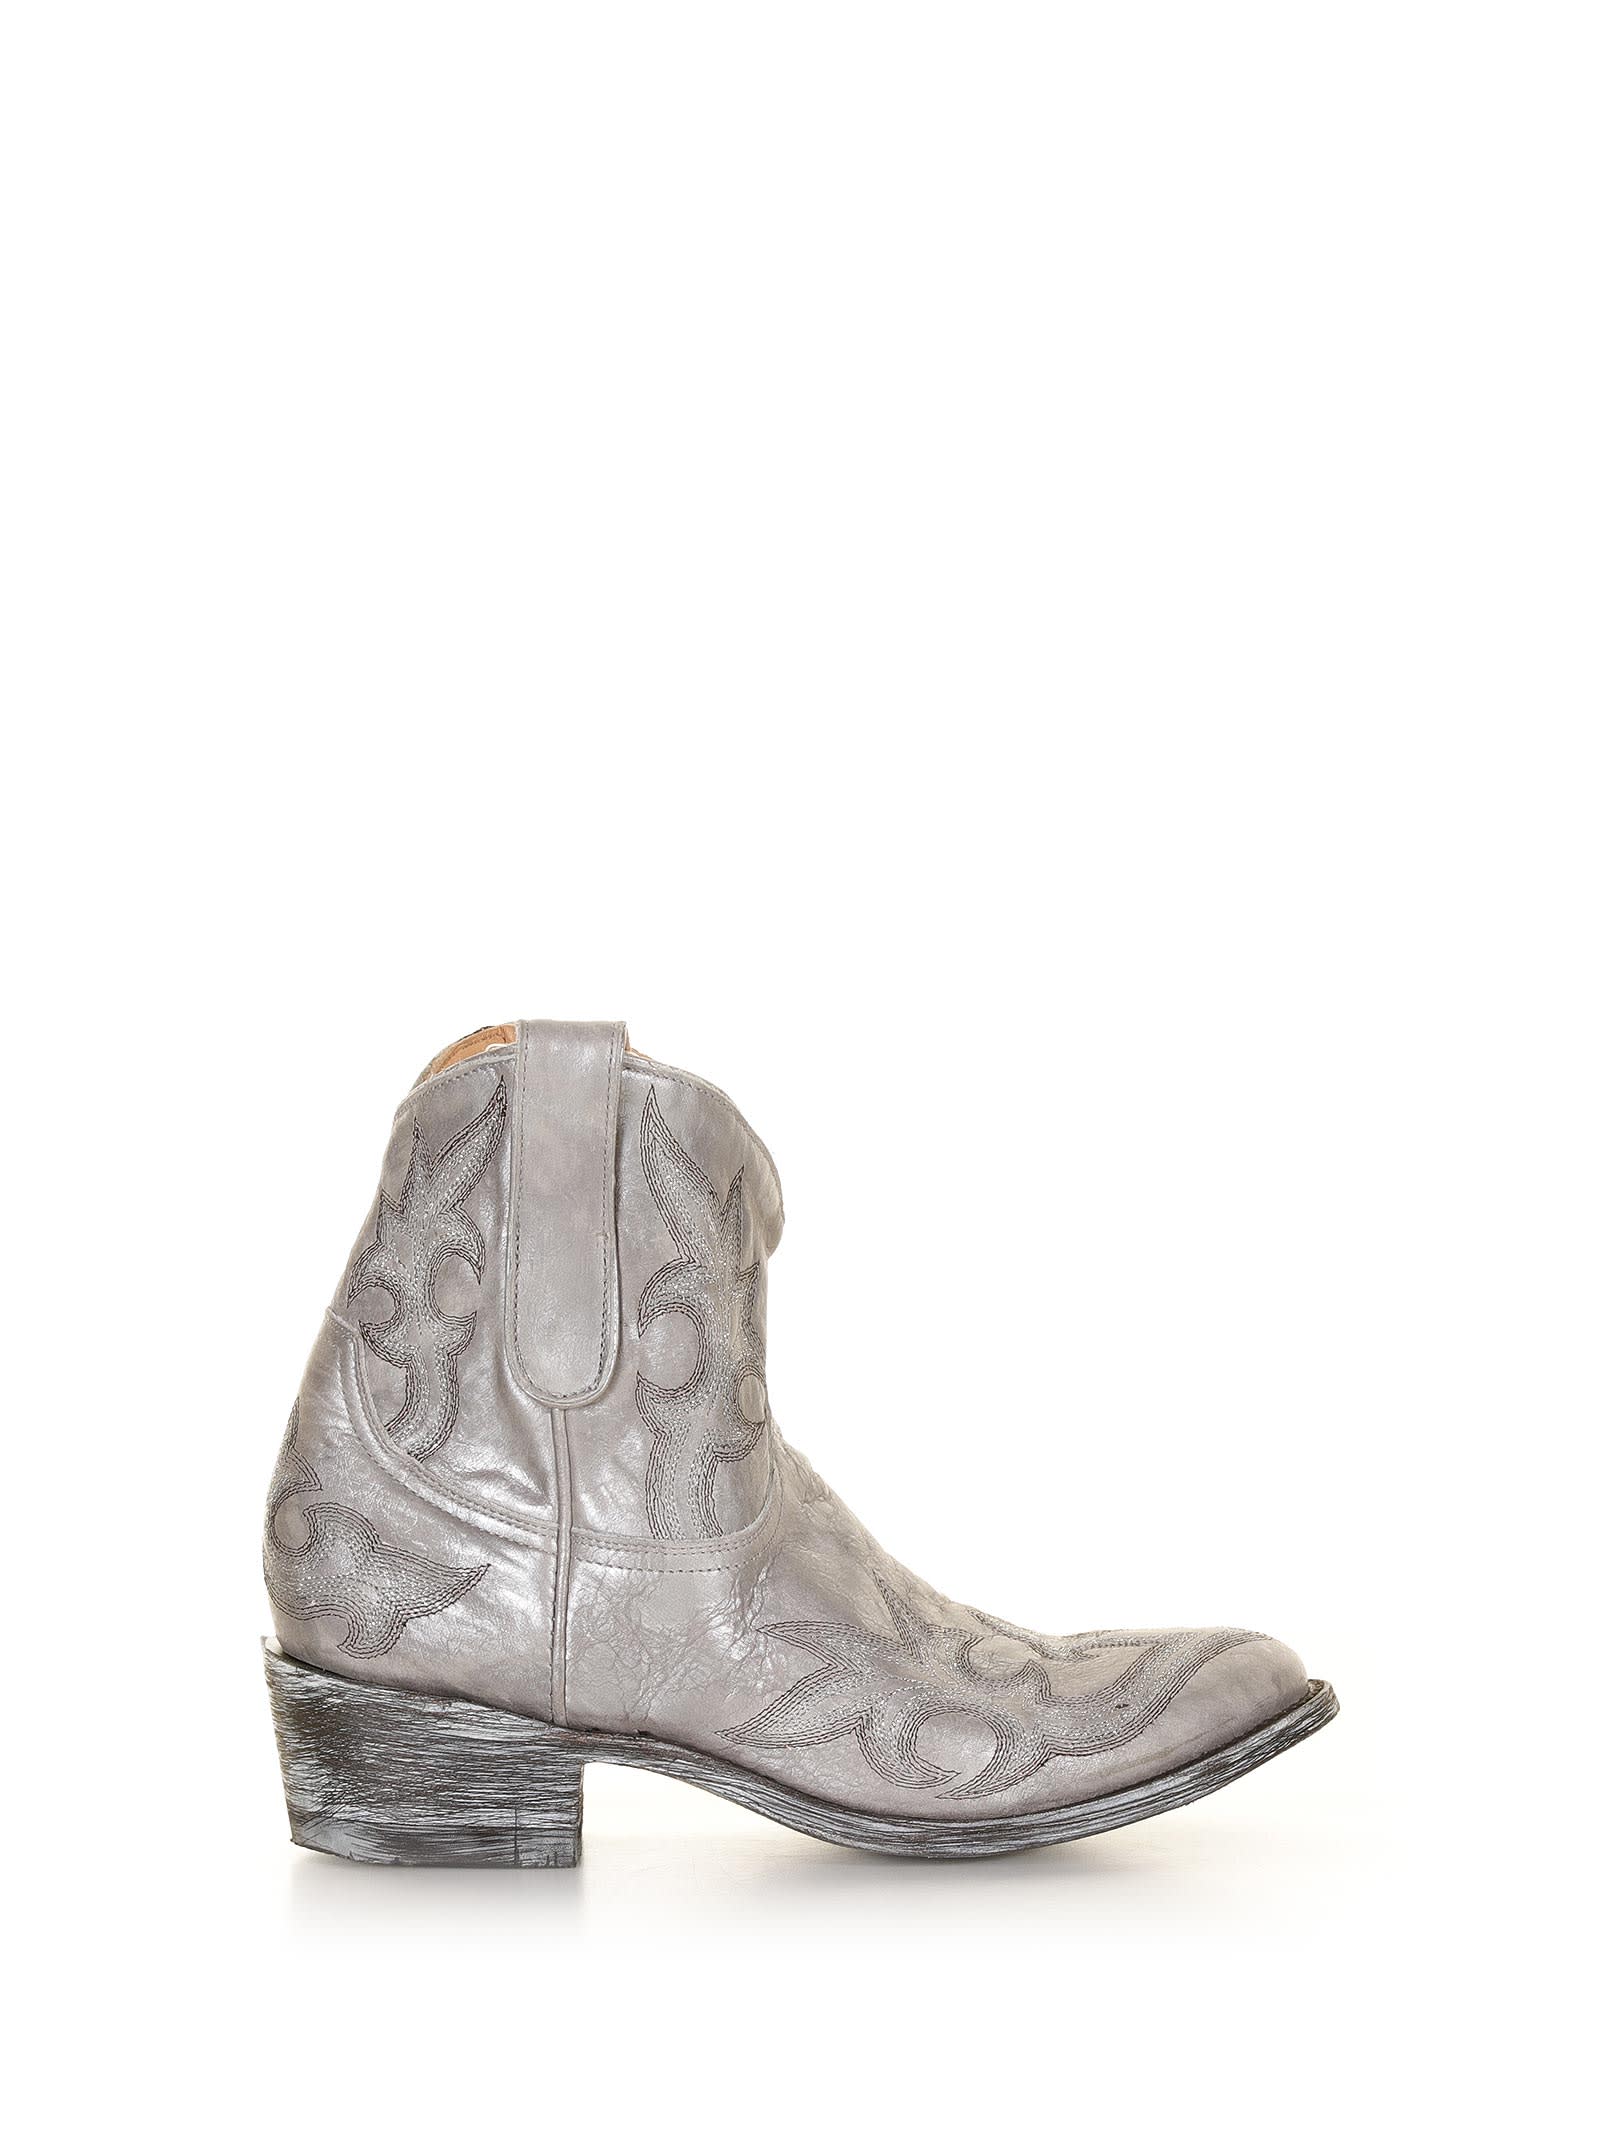 Mexicana Texan Ankle Boot With Worn Effect Silver In Agave Nacar Metallico